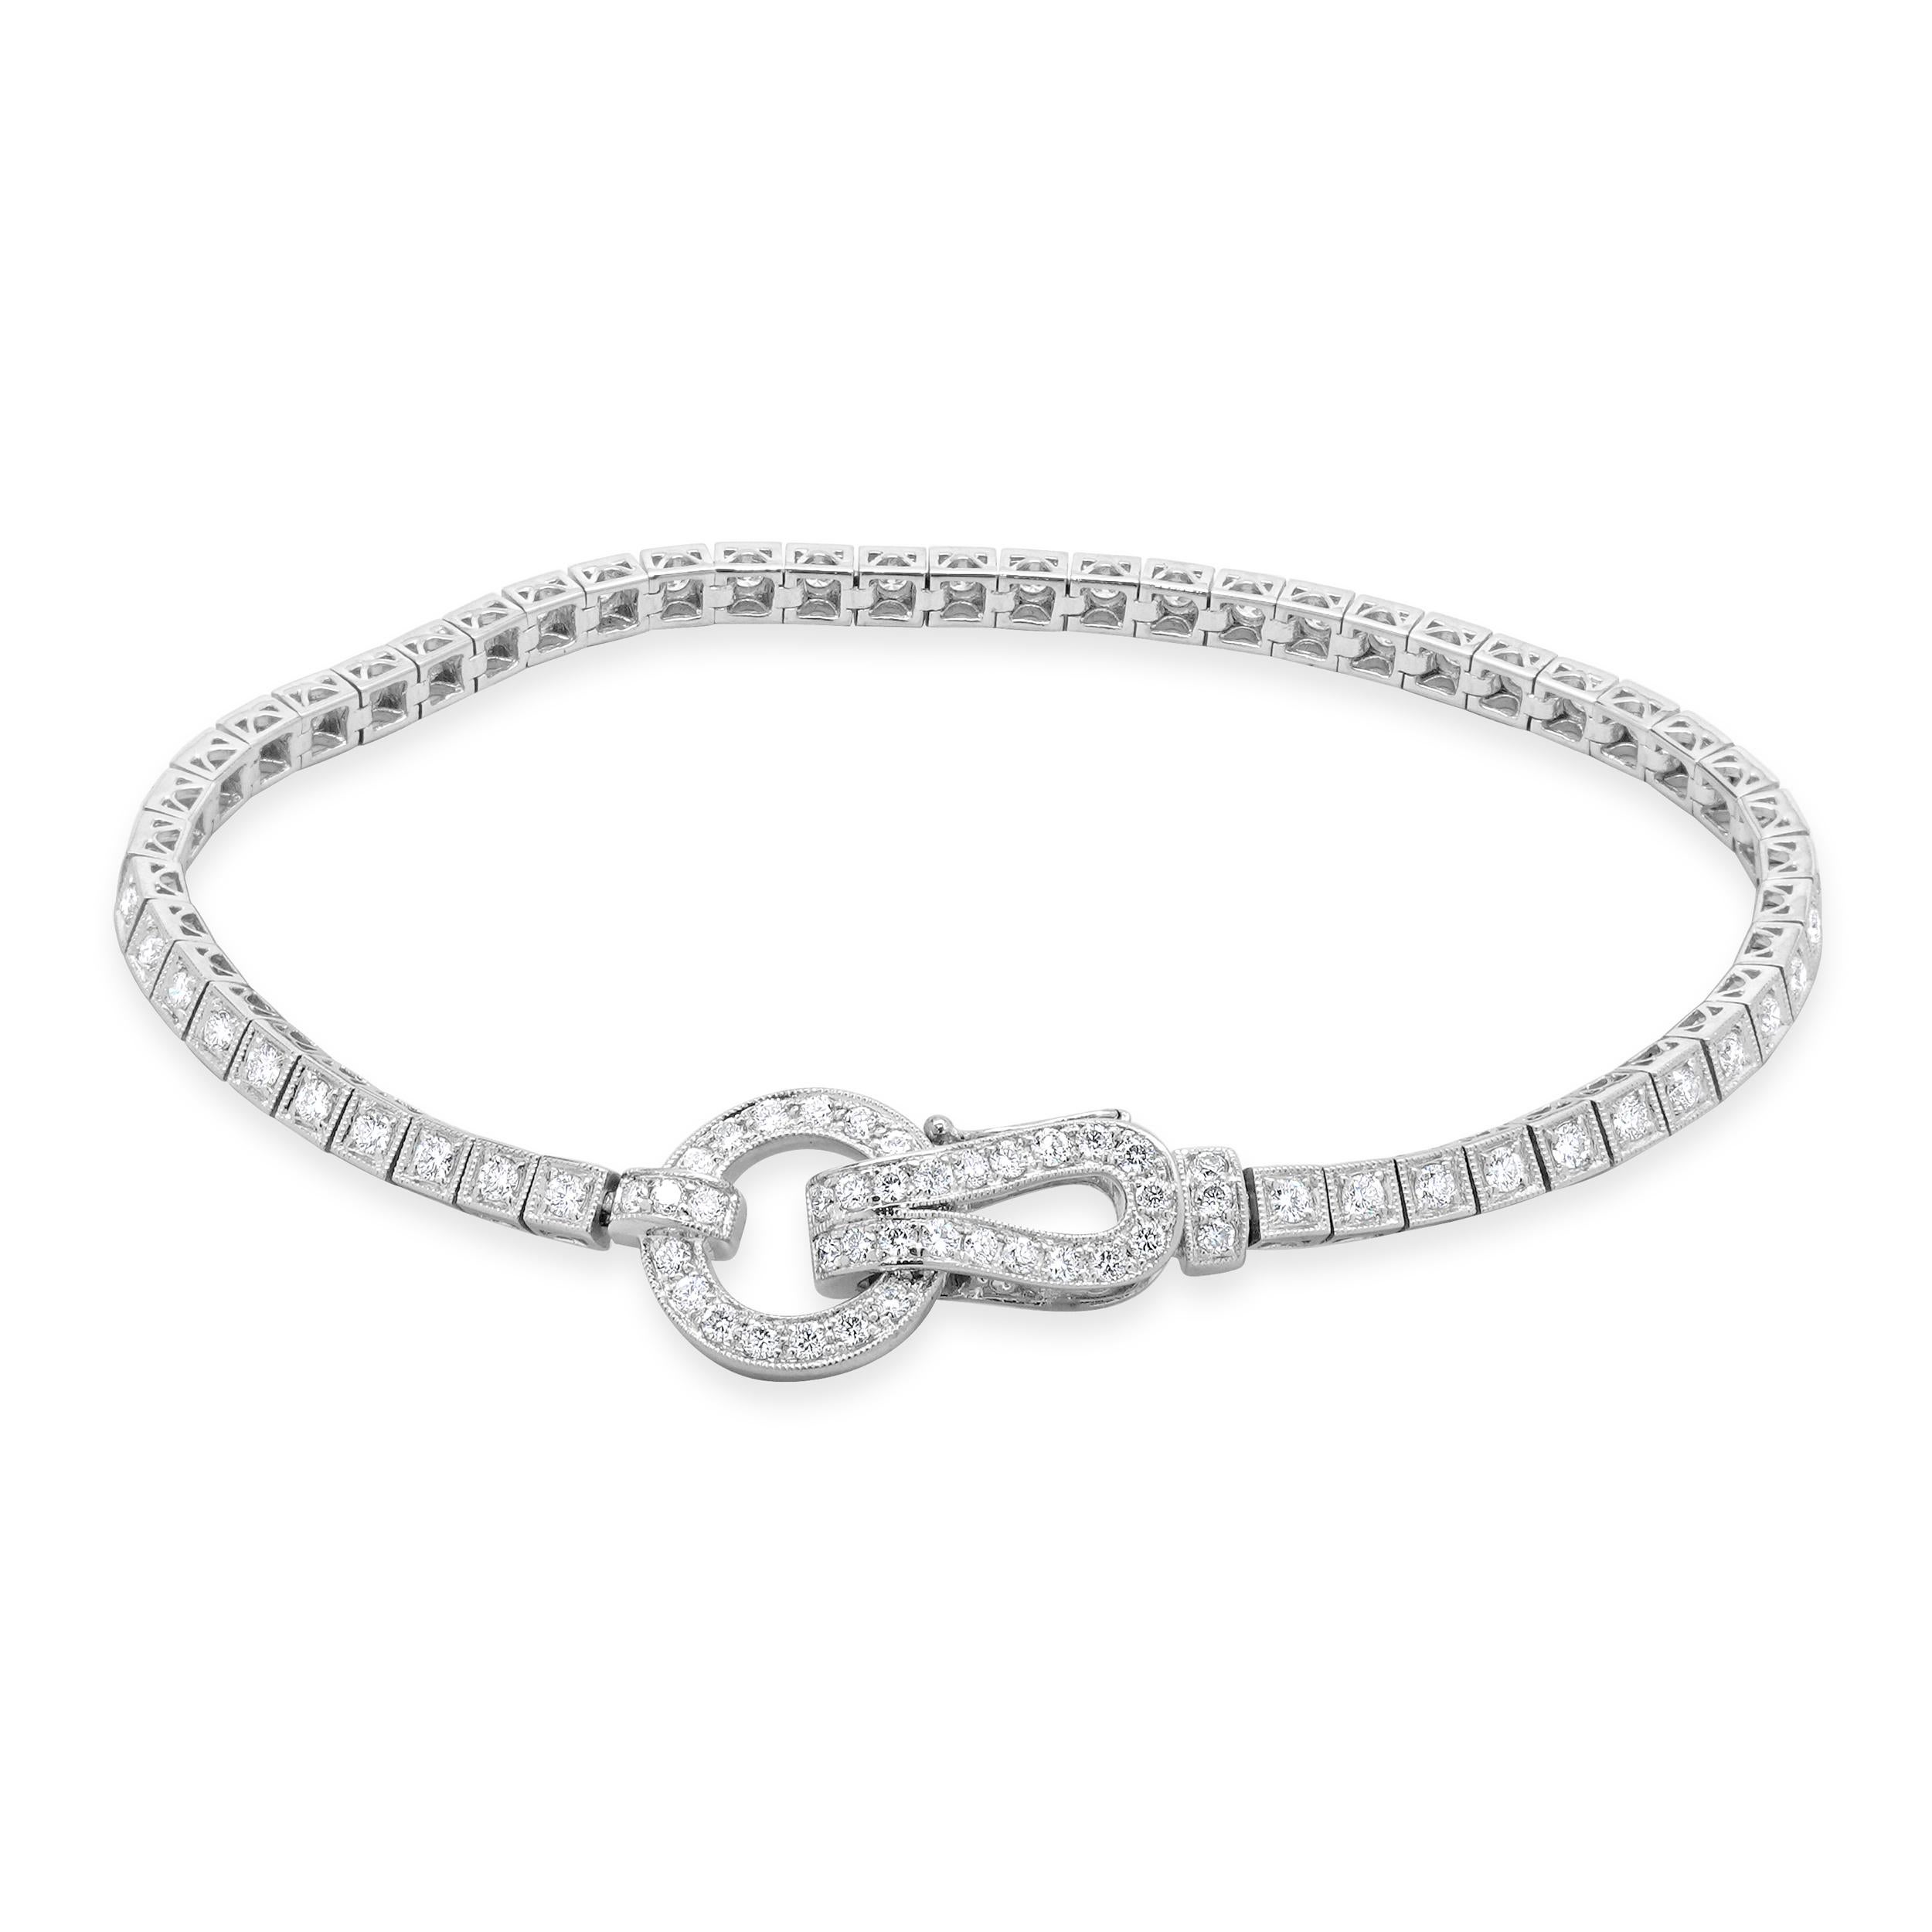 Designer: custom design
Material: 18K white gold
Diamond: 90 round brilliant diamonds= 1.40cttw
Color: H
Clarity: SI1-SI2
Dimensions: bracelet will fit up to a 7-inch wrist
Weight: 15.03 grams
